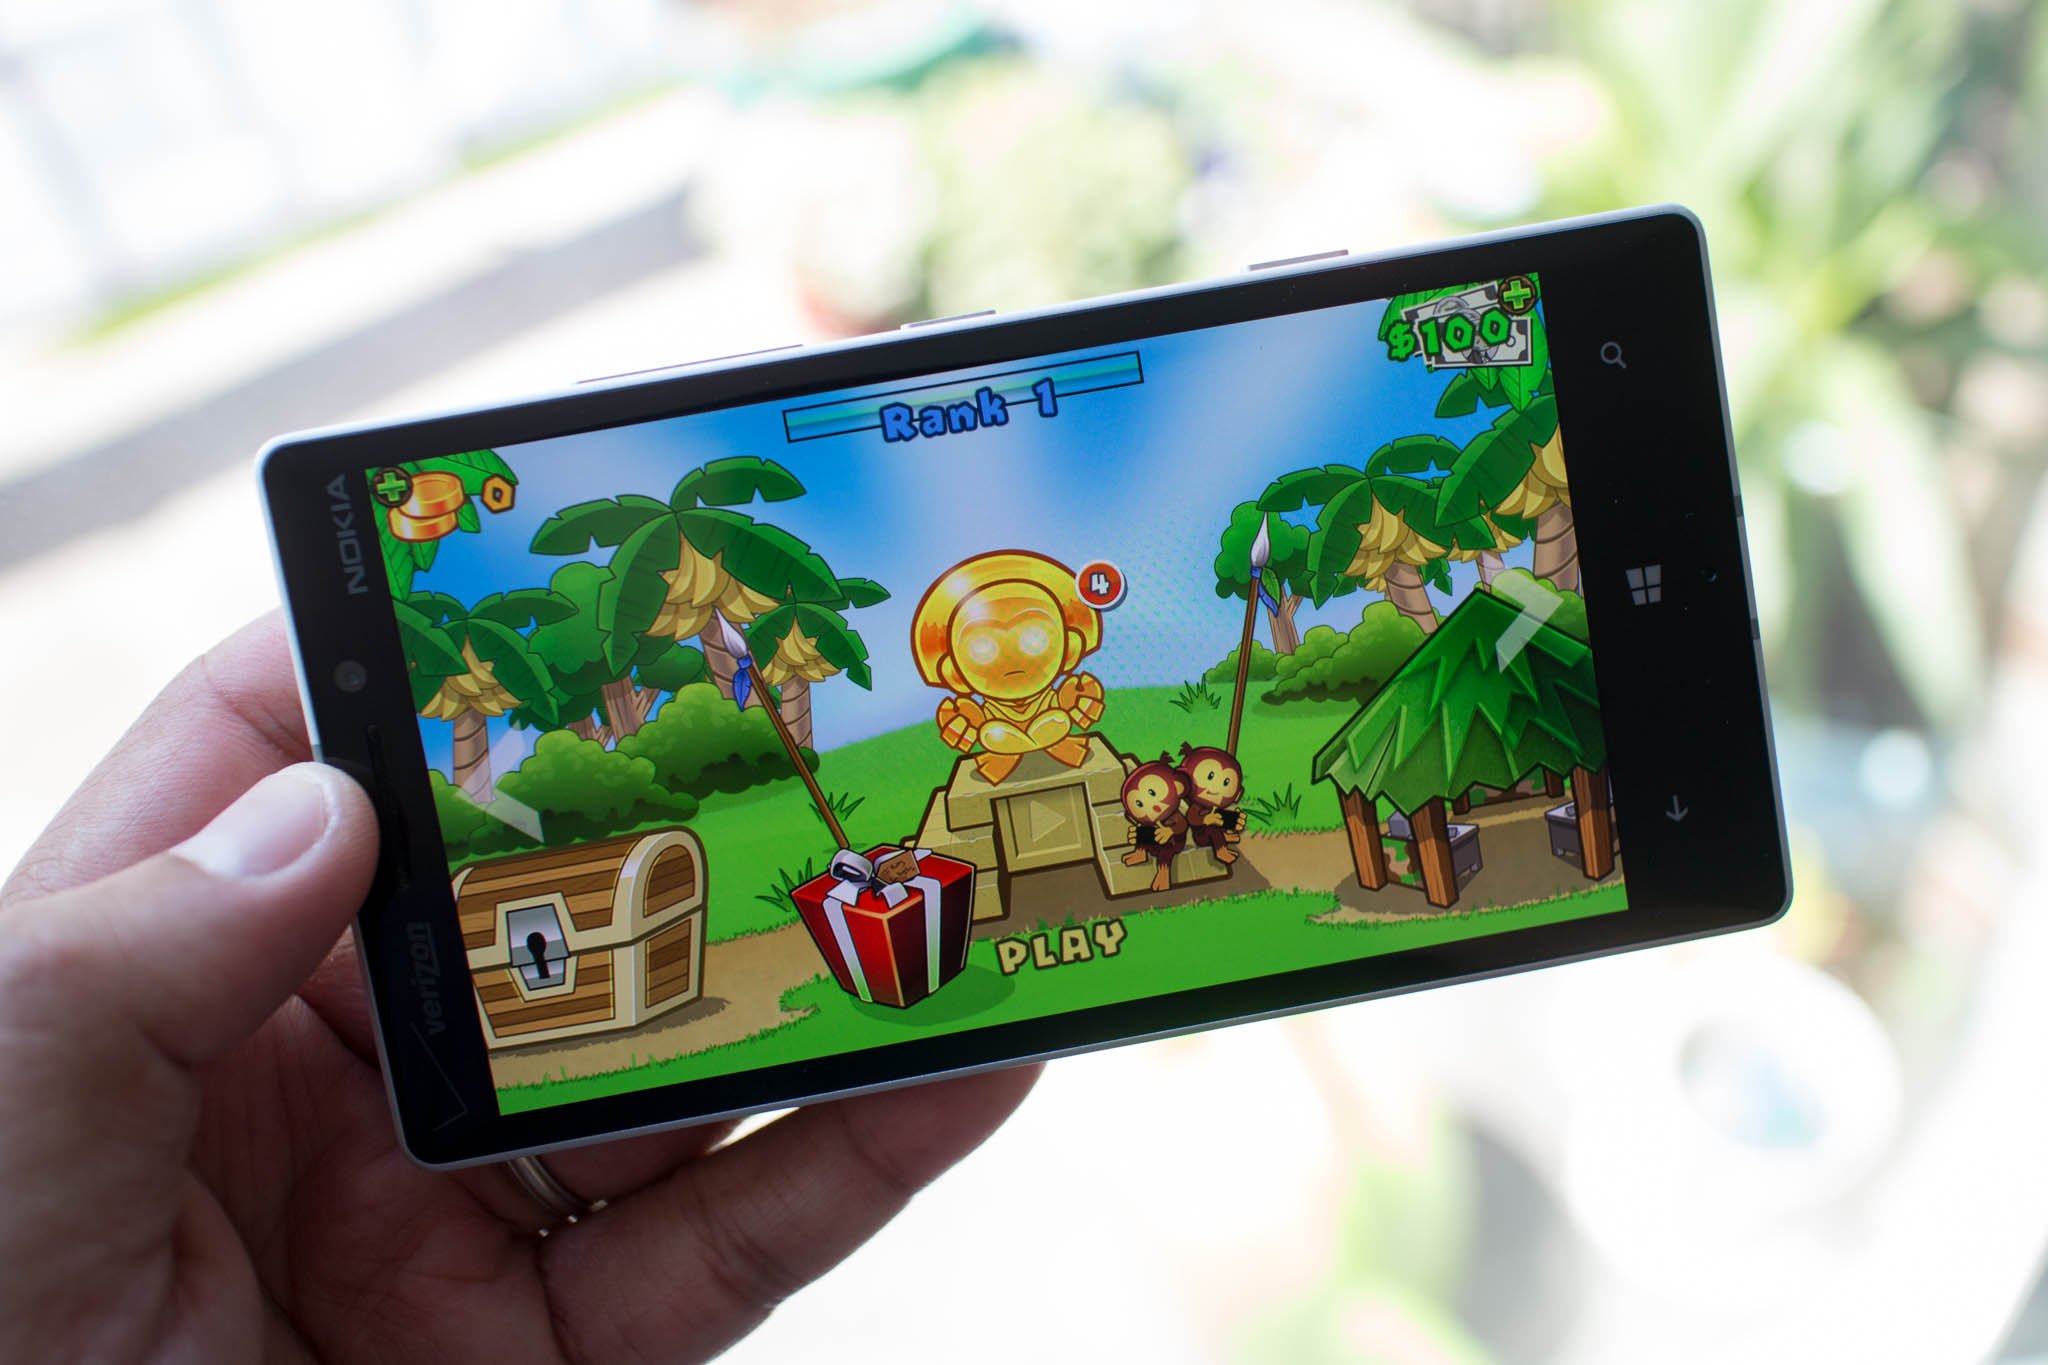 The Popular Tower Defense Game Bloons Td 5 Is A Universal Game For Windows And Windows Phone Windows Central